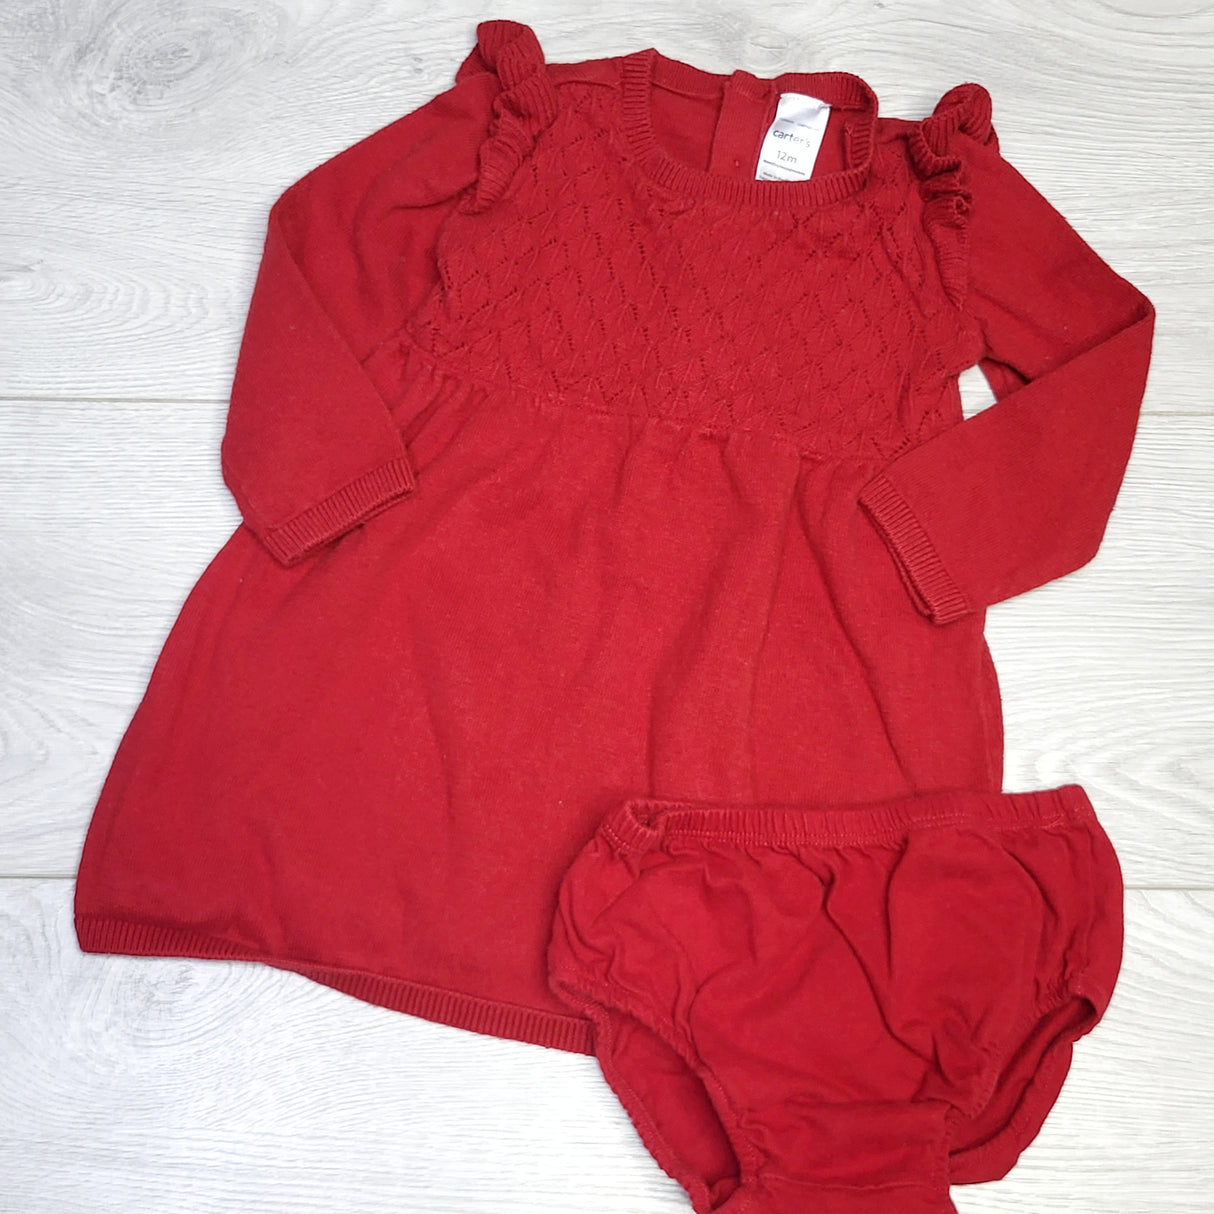 KJHN1 - Carters red sweater dress with diaper cover. Size 12 months